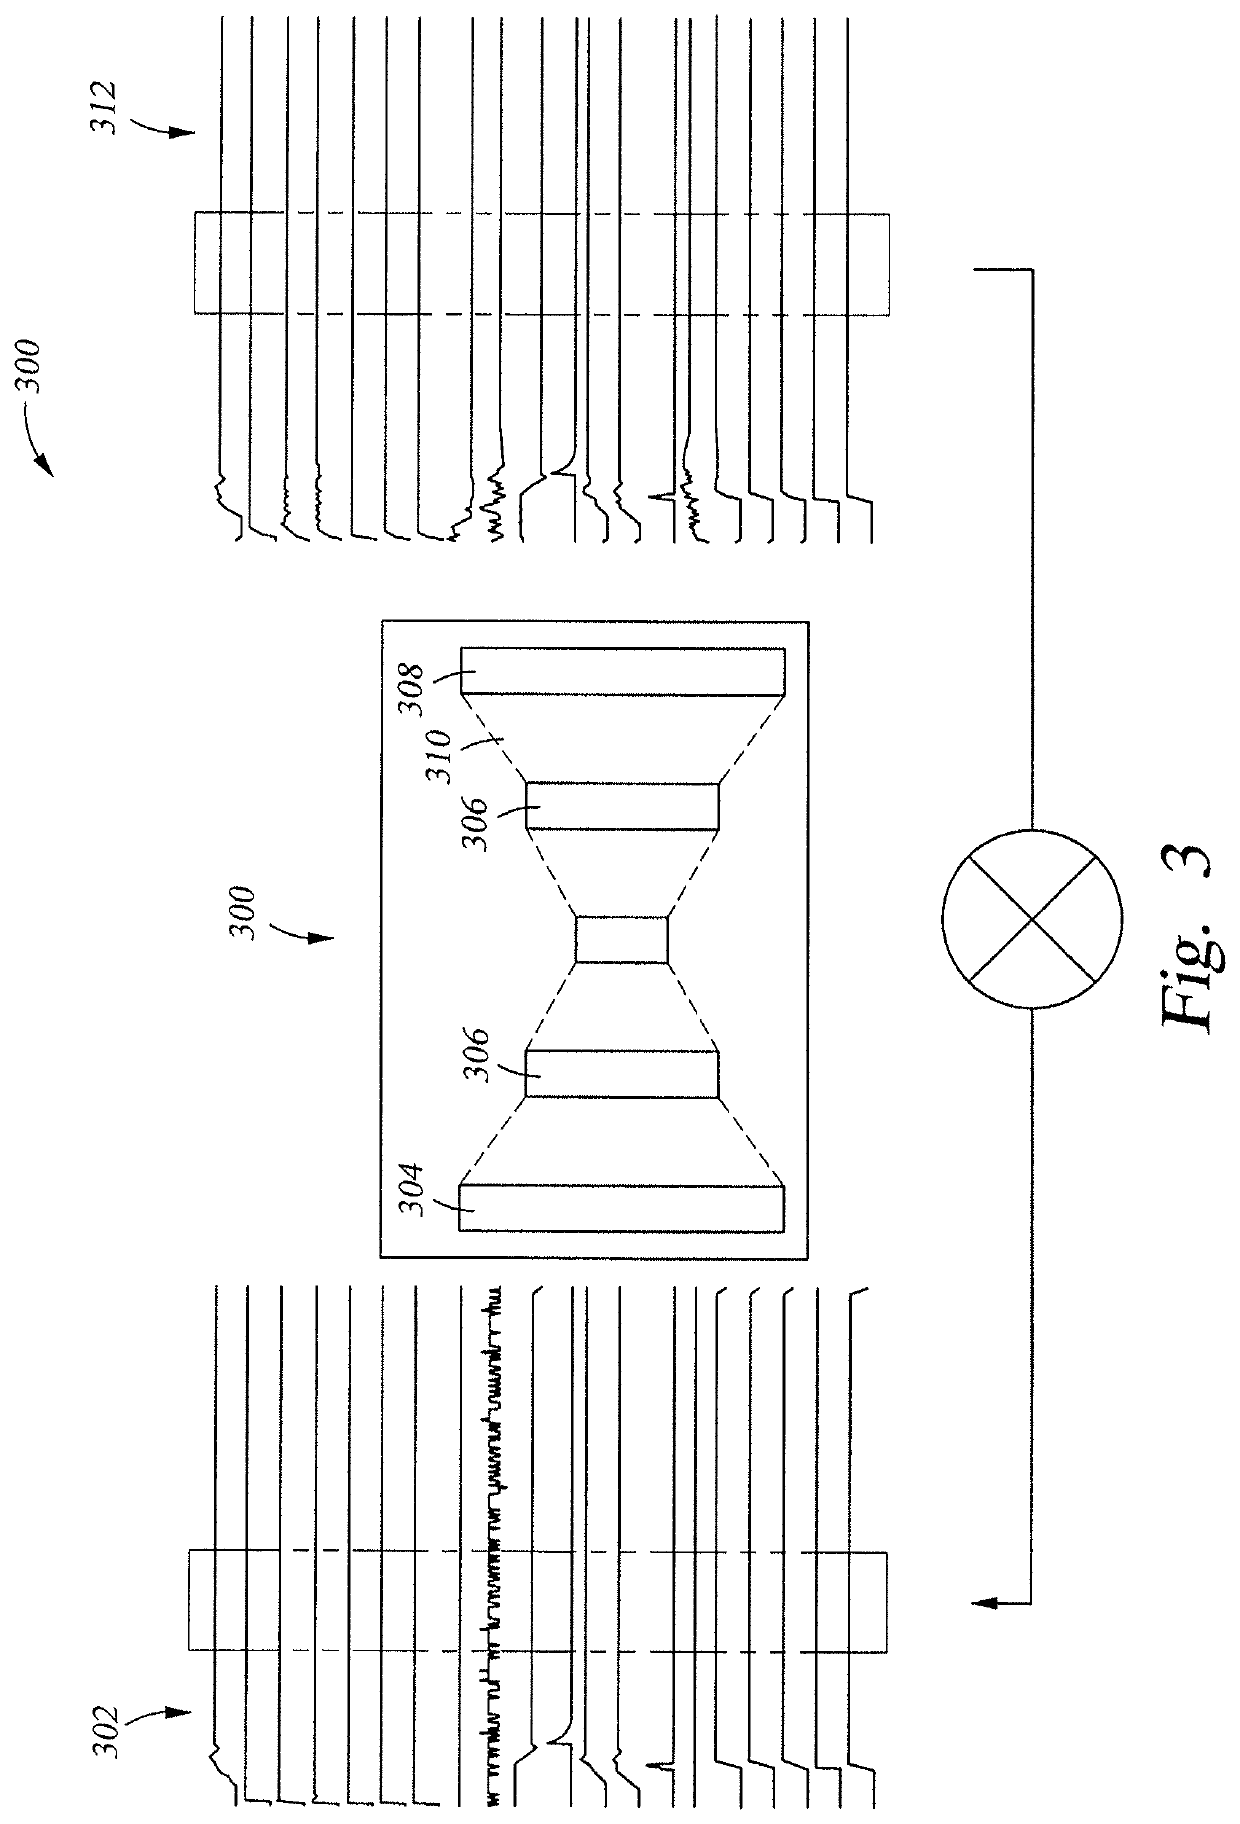 Deep auto-encoder for equipment health monitoring and fault detection in semiconductor and display process equipment tools